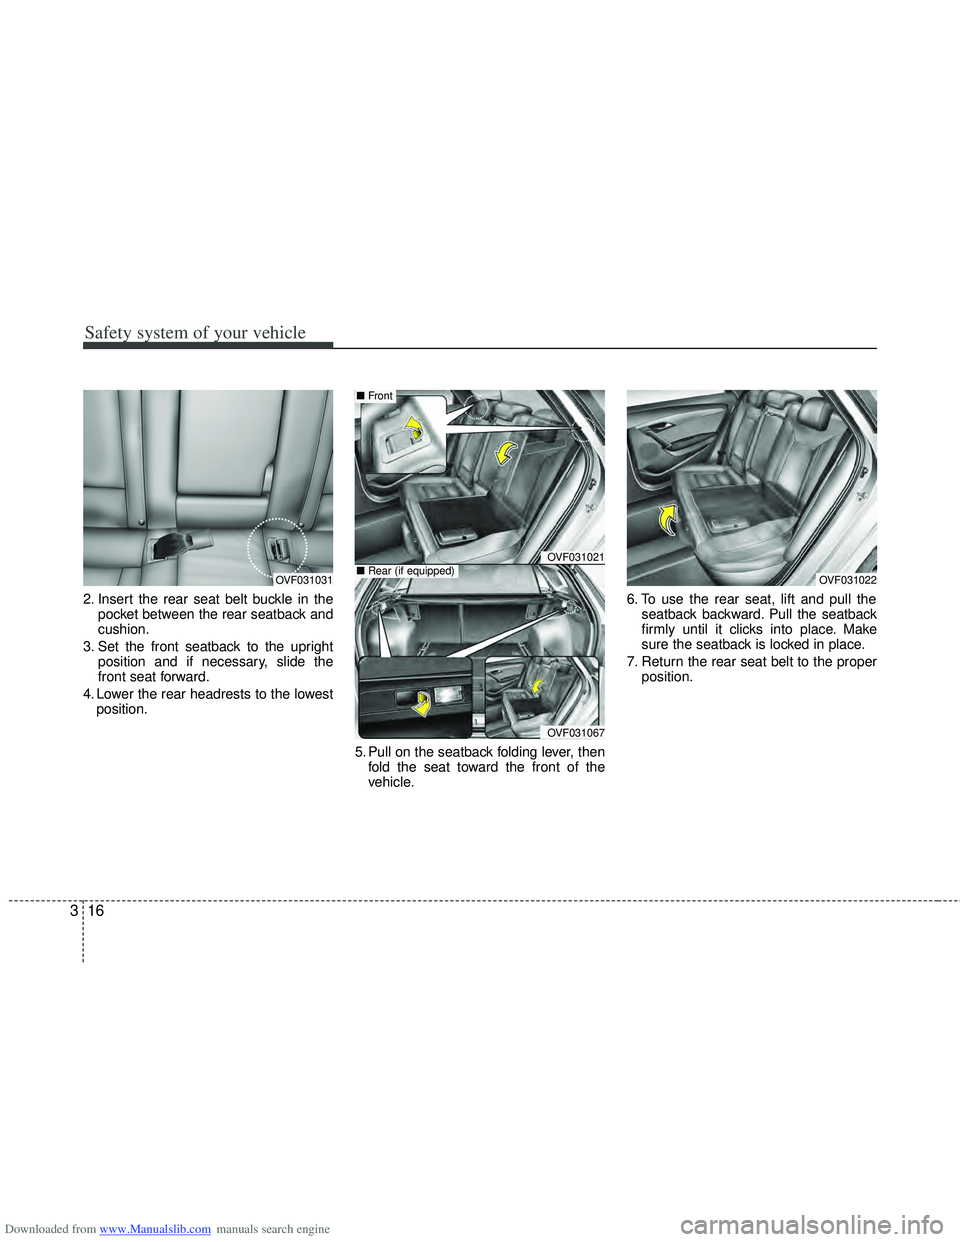 HYUNDAI I40 2011 Owners Guide Downloaded from www.Manualslib.com manuals search engine Safety system of your vehicle
16
3
2. Insert the rear seat belt buckle in the
pocket between the rear seatback and
cushion.
3. Set the front se